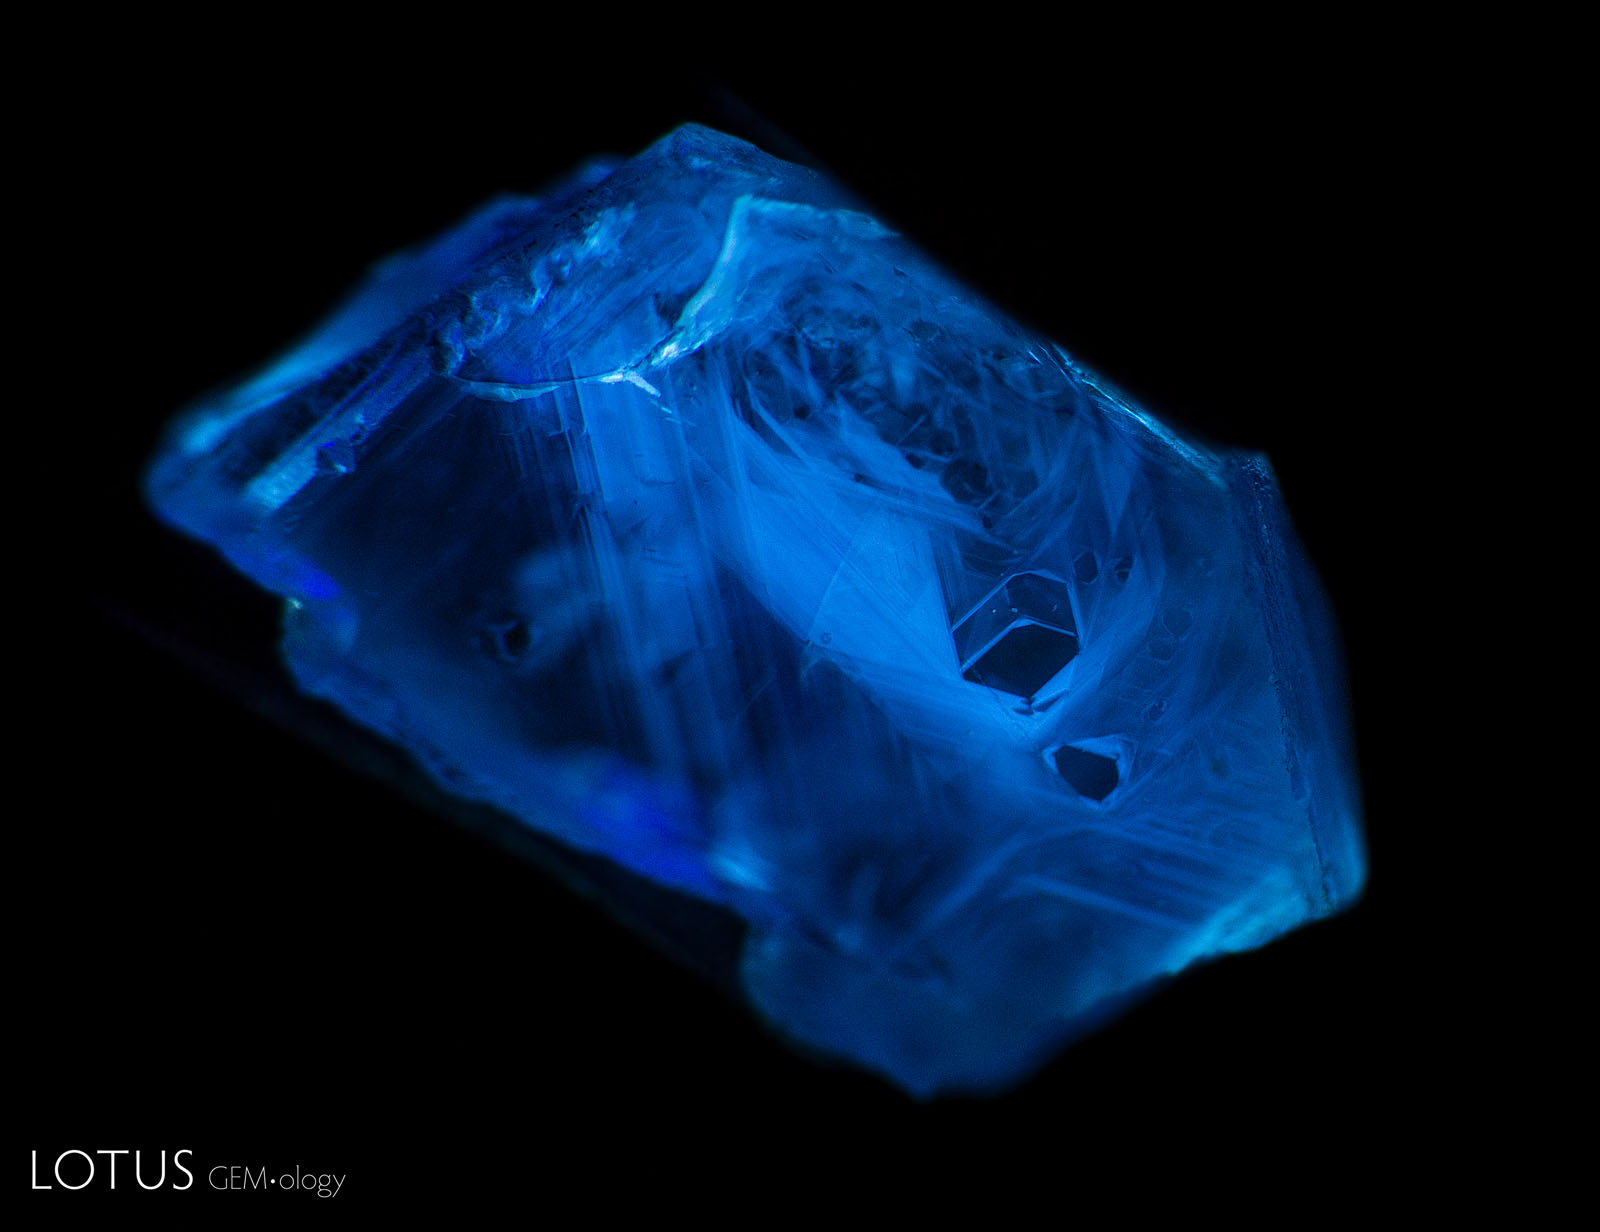 Short-wave UV fluorescence reaction of a Madagascar sapphire during heating Figure 18. Sample 10 did not show any short-wave fluorescence reaction until it was heated to 1000°C. At this point it displayed a strong chalky blue reaction, with complex angular fluorescent zones. Photo by E. Billie Hughes.